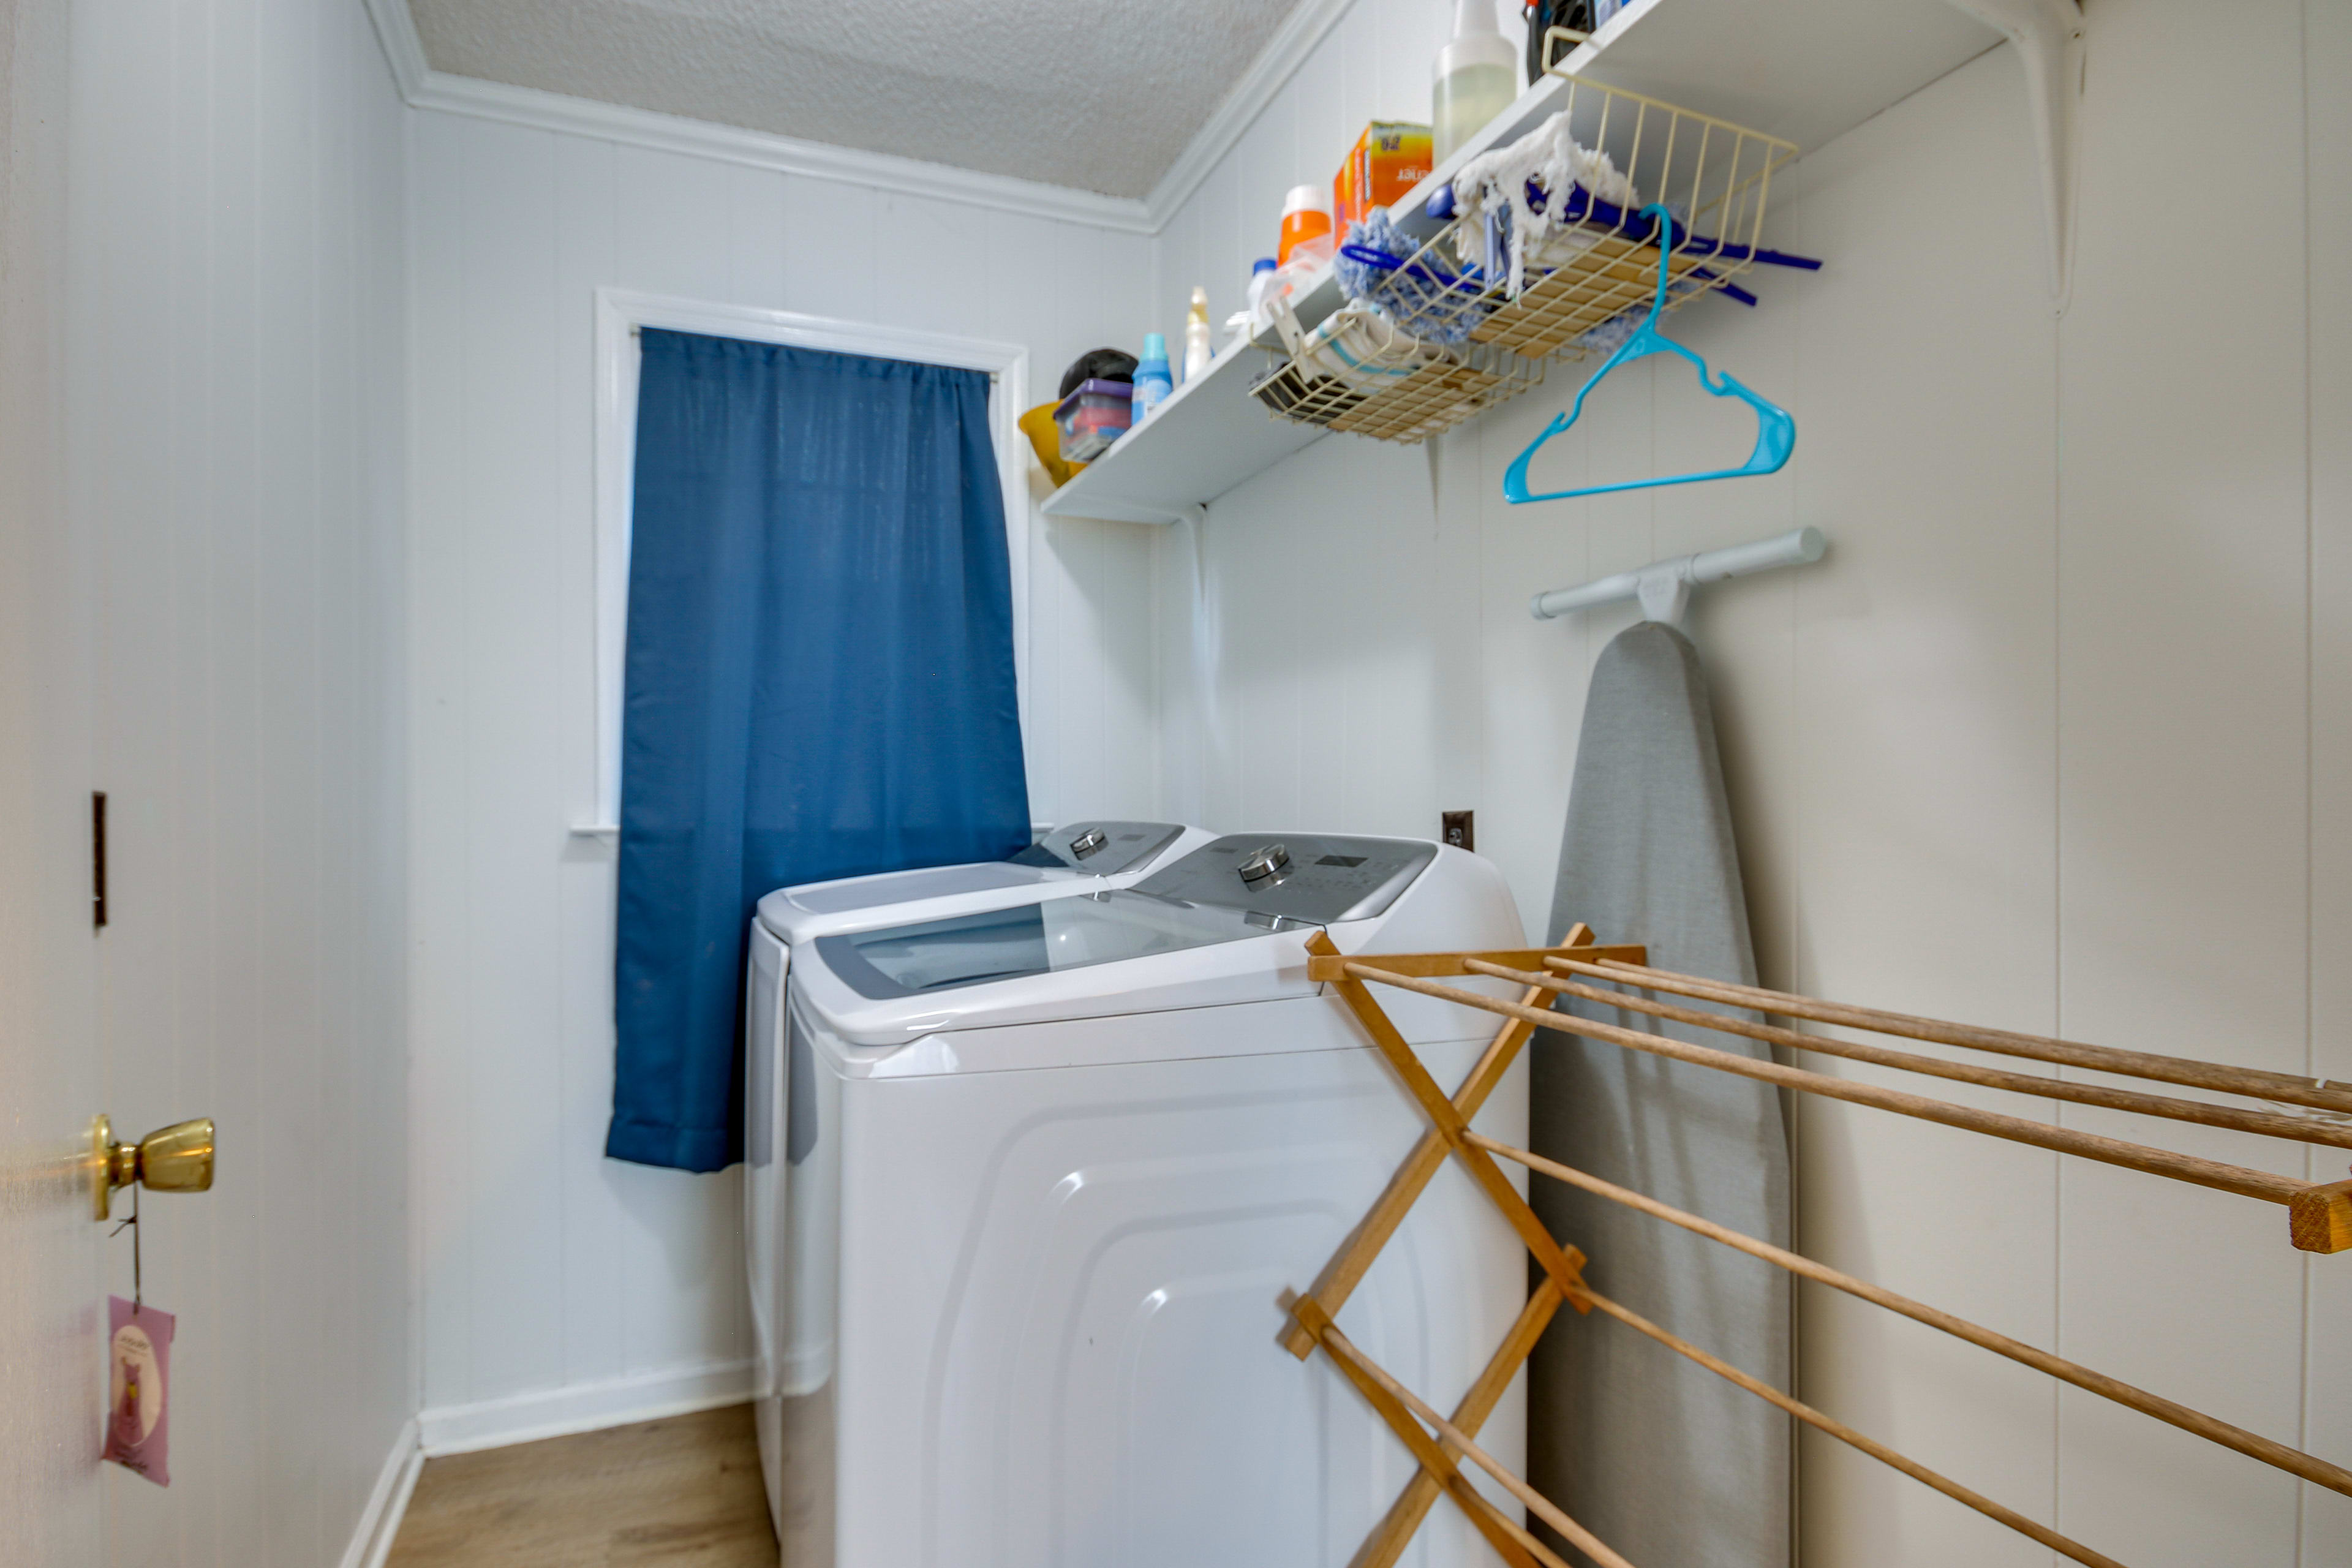 Laundry Area | Washer/Dryer | Laundry Detergent | Iron/Board